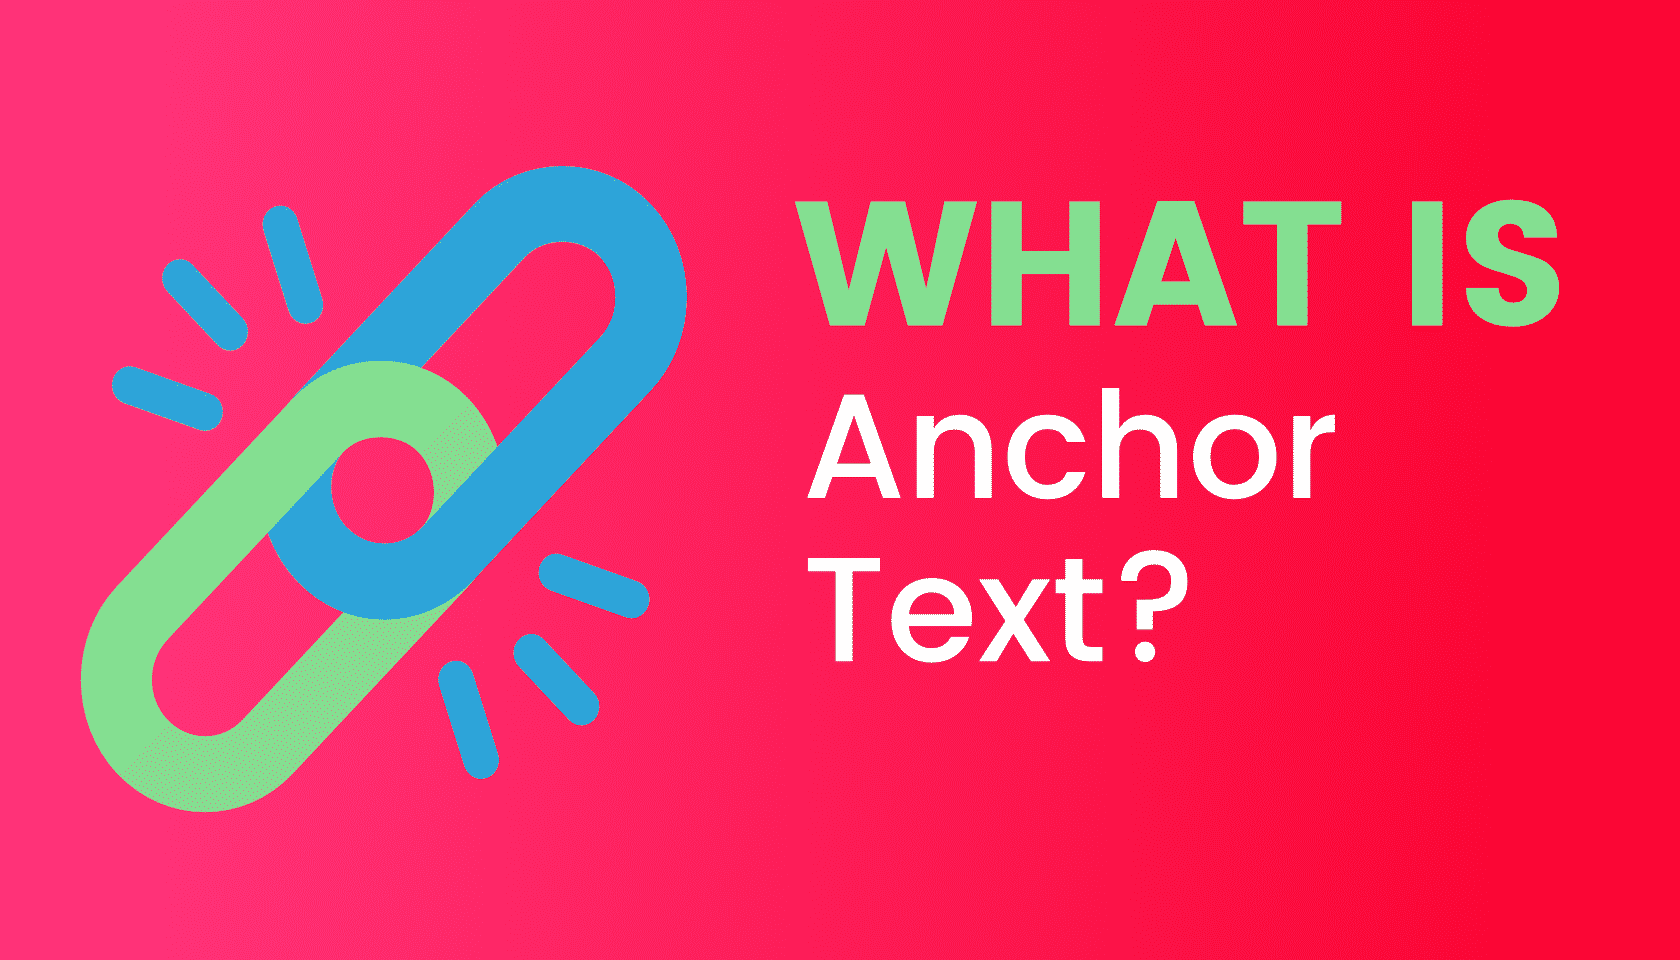 What is: Anchor Text?